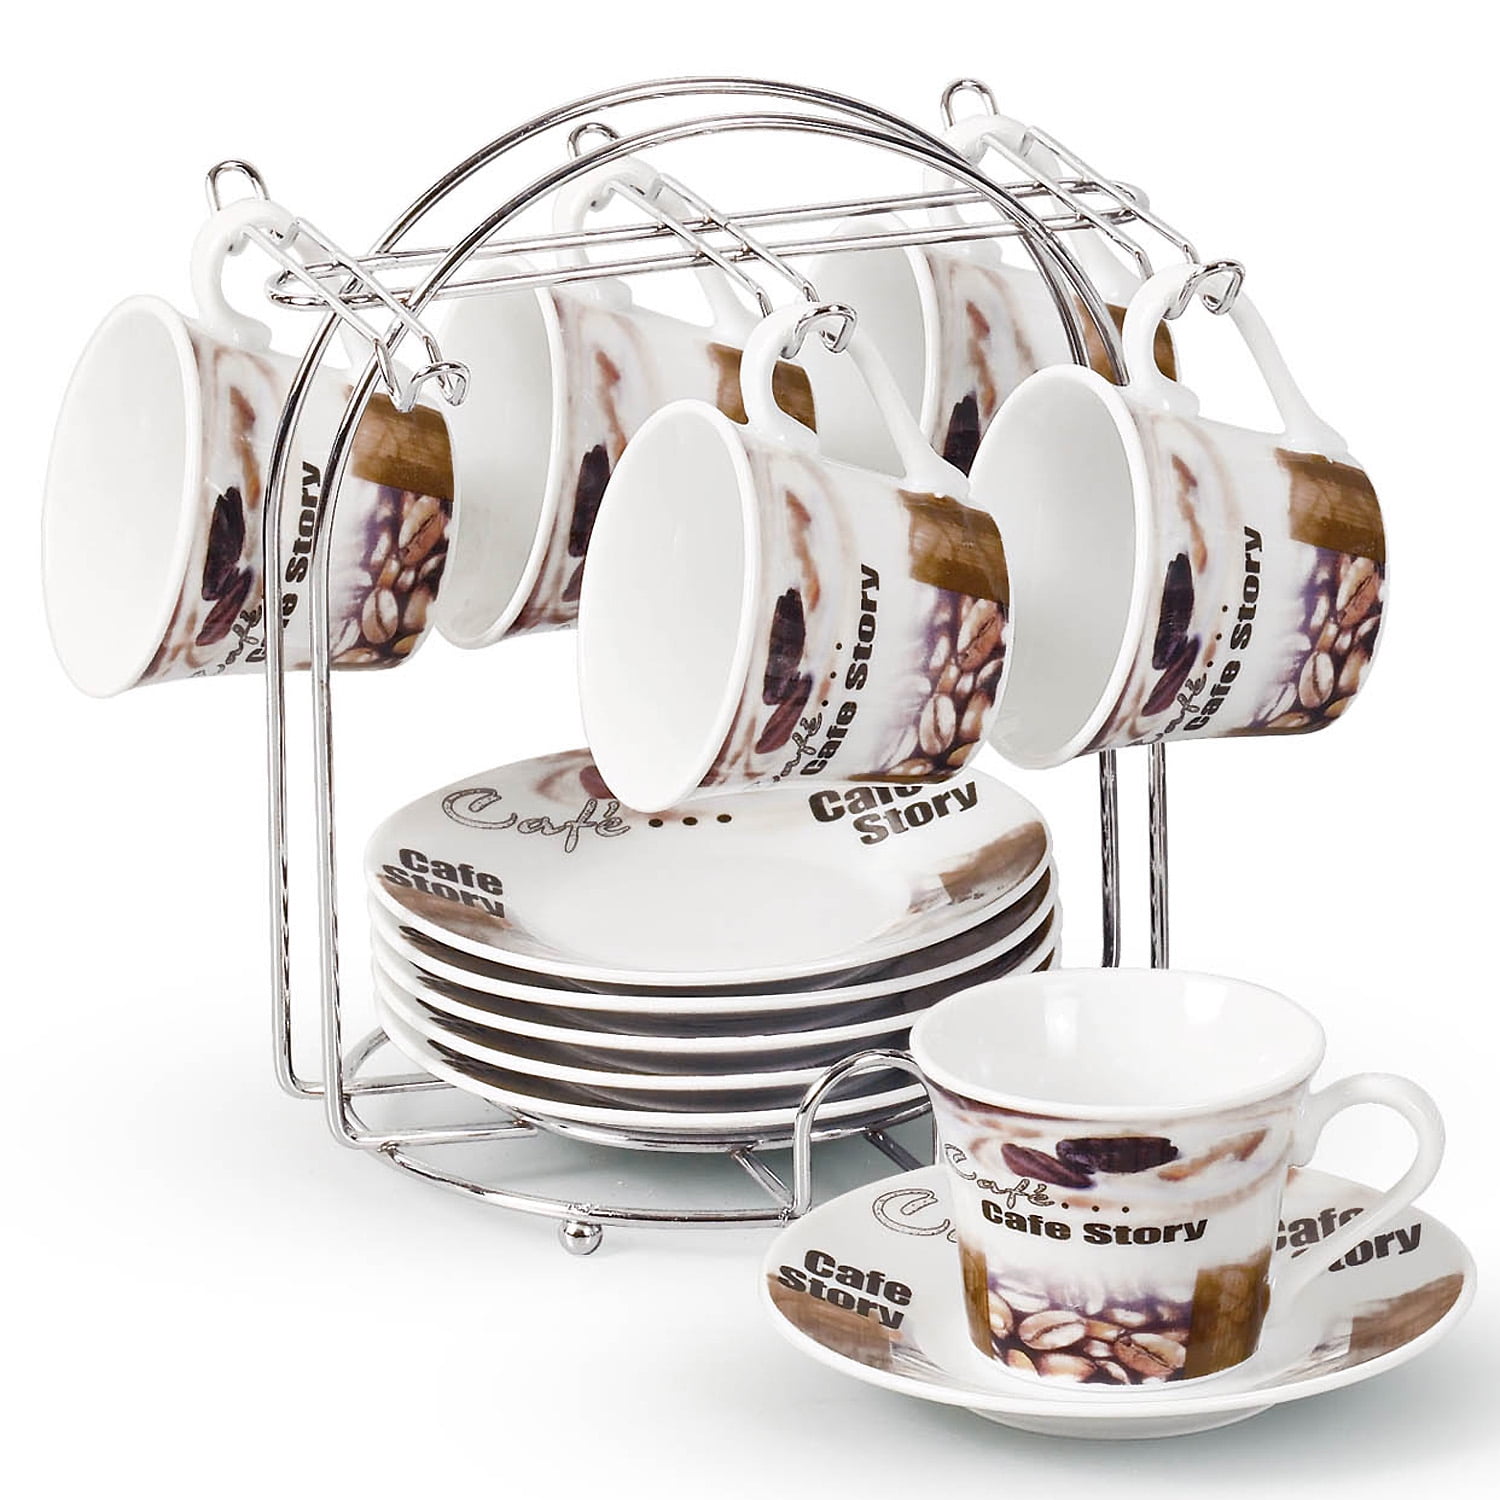 Set of 6 Porcelain Espresso Cups and Saucers Set with Metal Stand - 2oz,  White